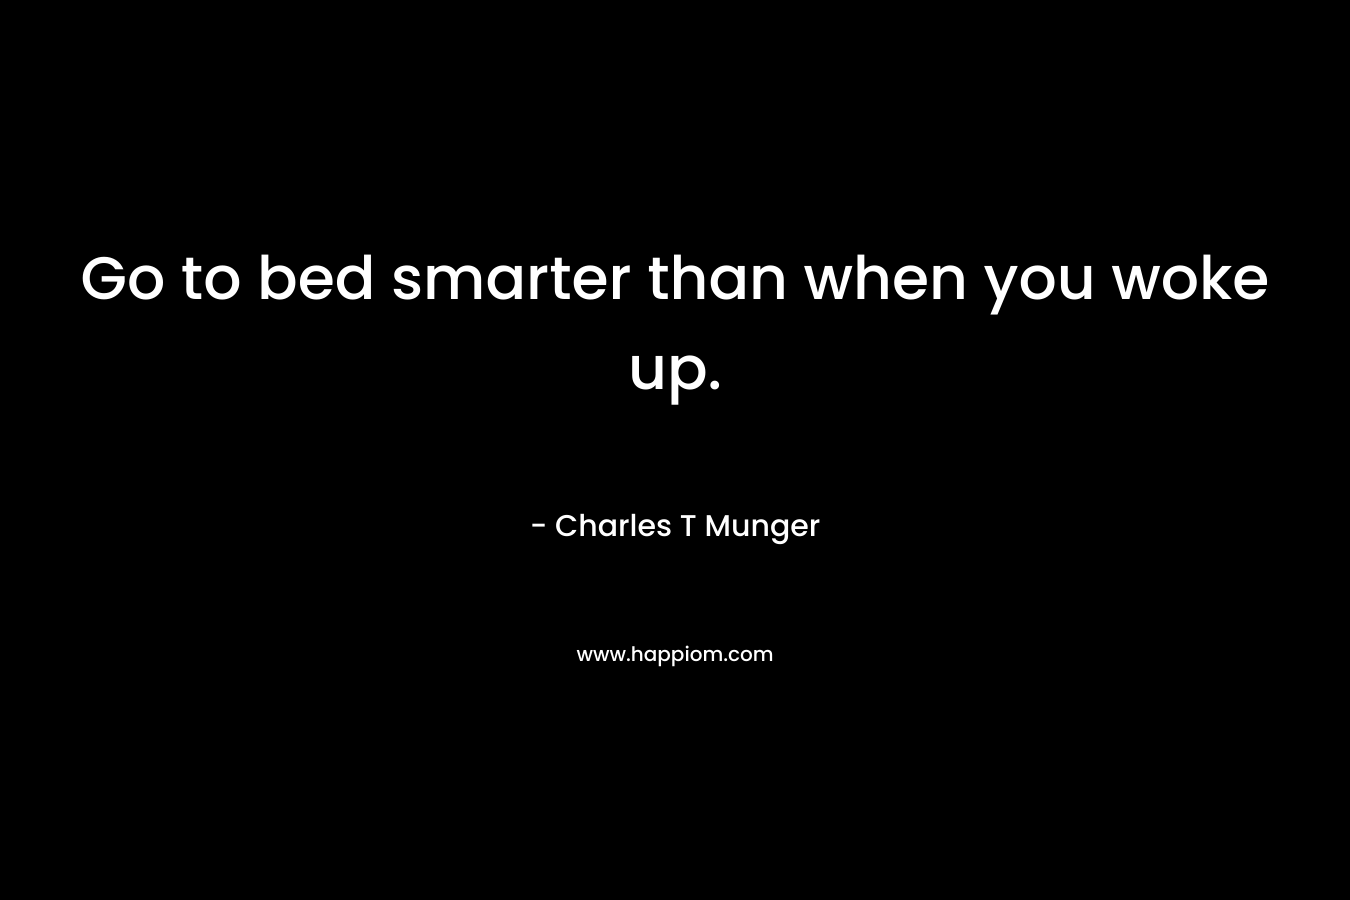 Go to bed smarter than when you woke up.